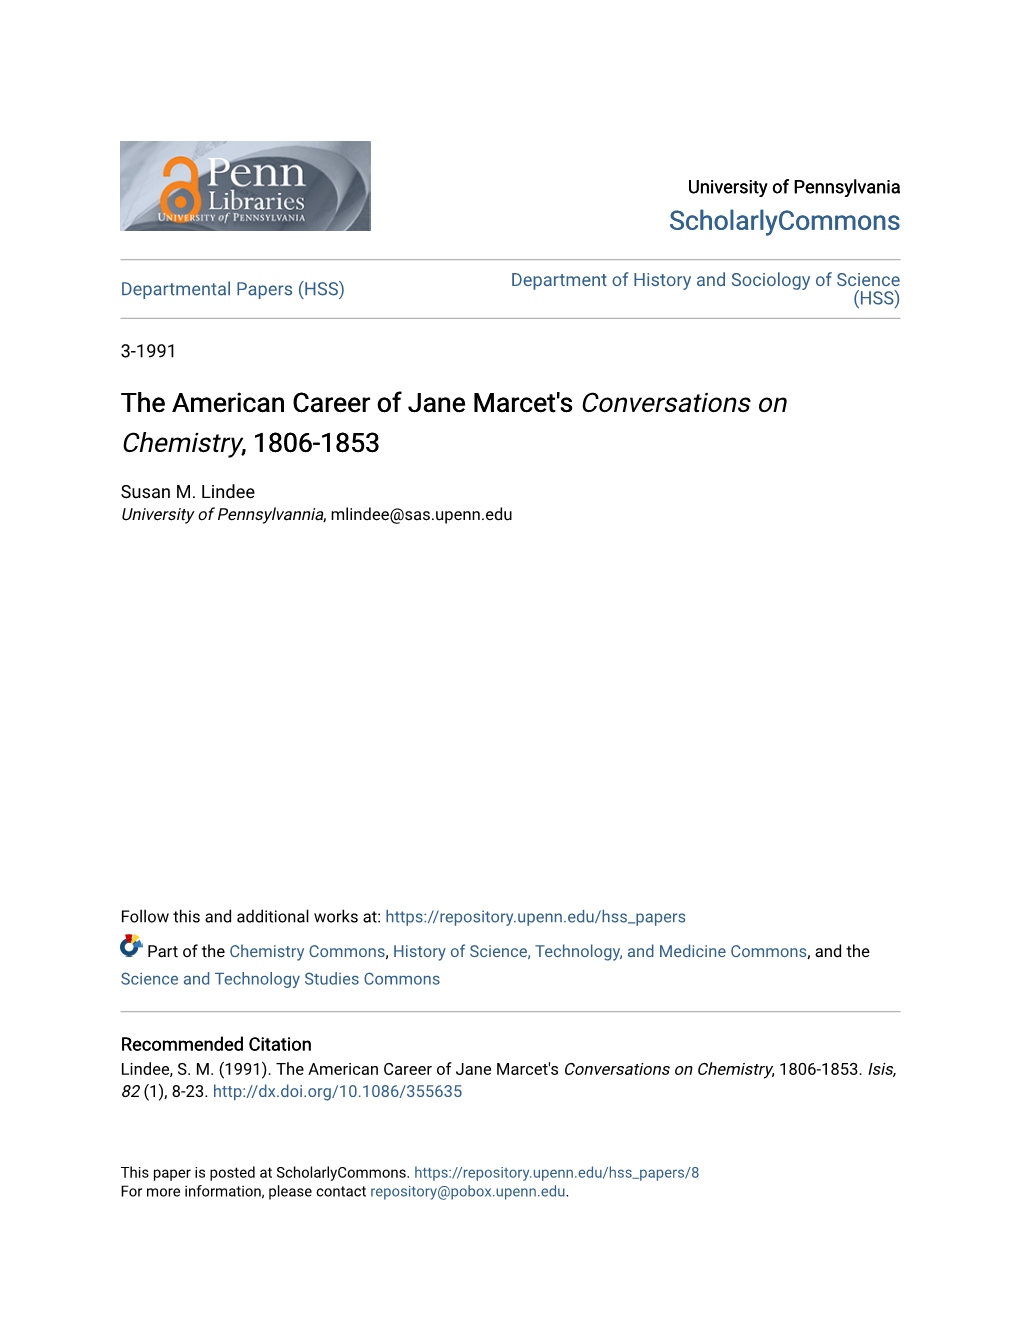 The American Career of Jane Marcet's Conversations on Chemistry, 1806-1853